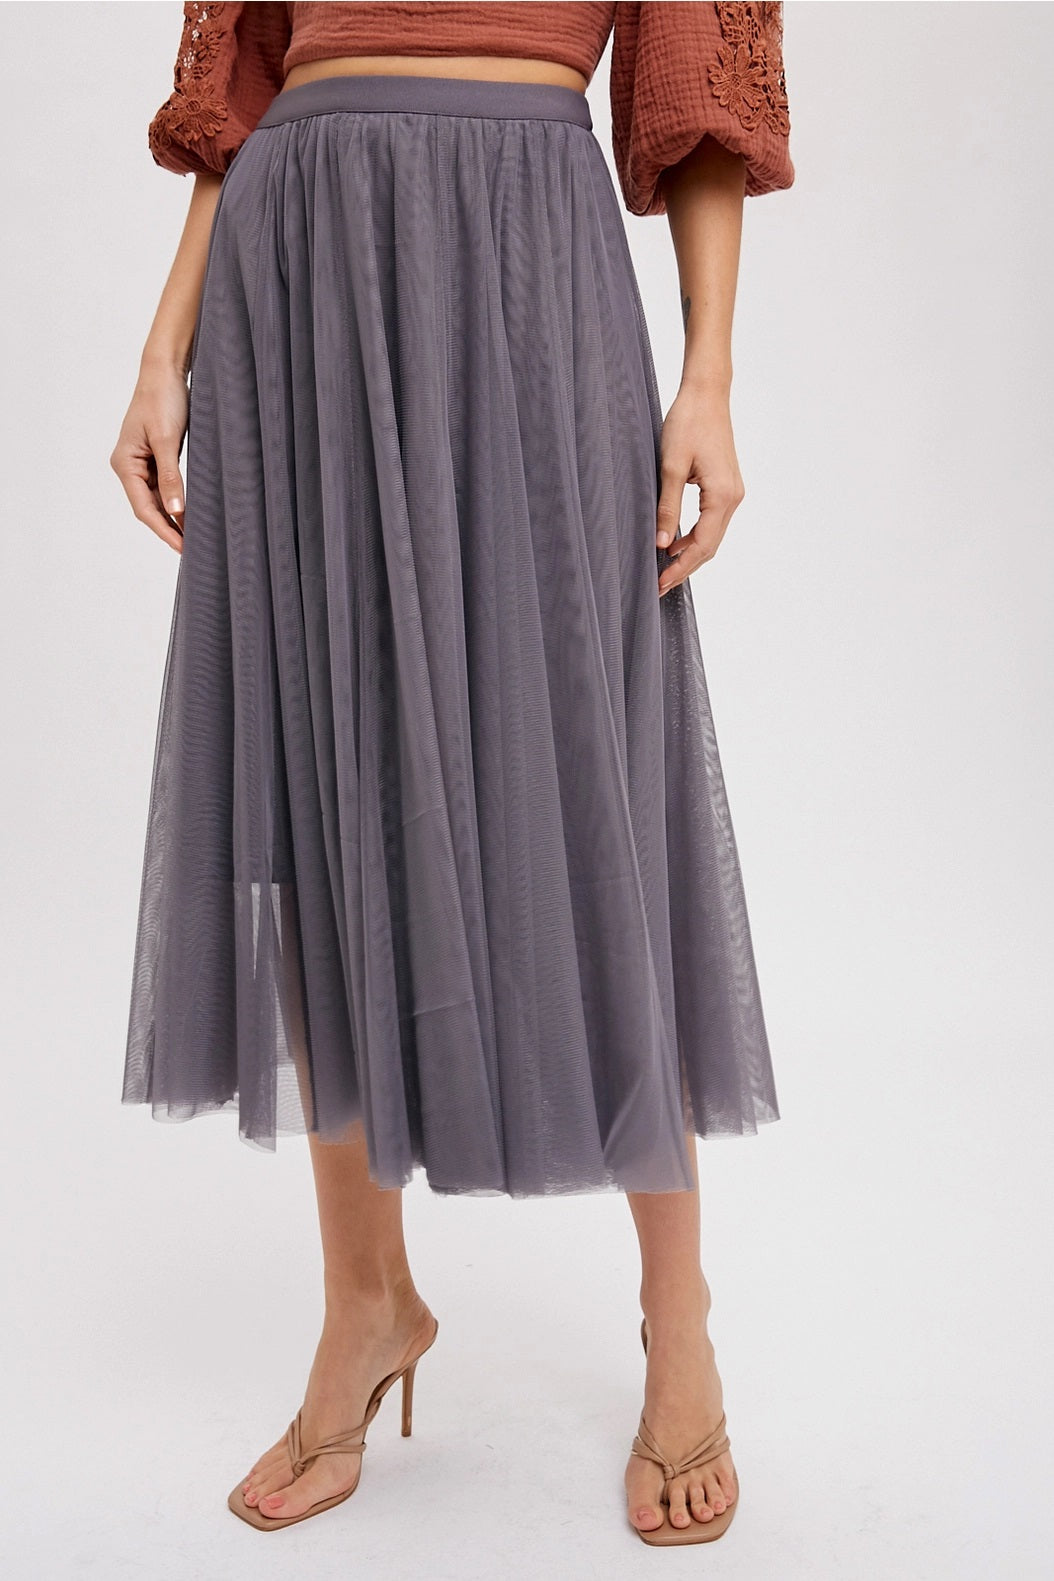 CARRIE TULLE  SKIRT - dark mint, ash or dusty pink